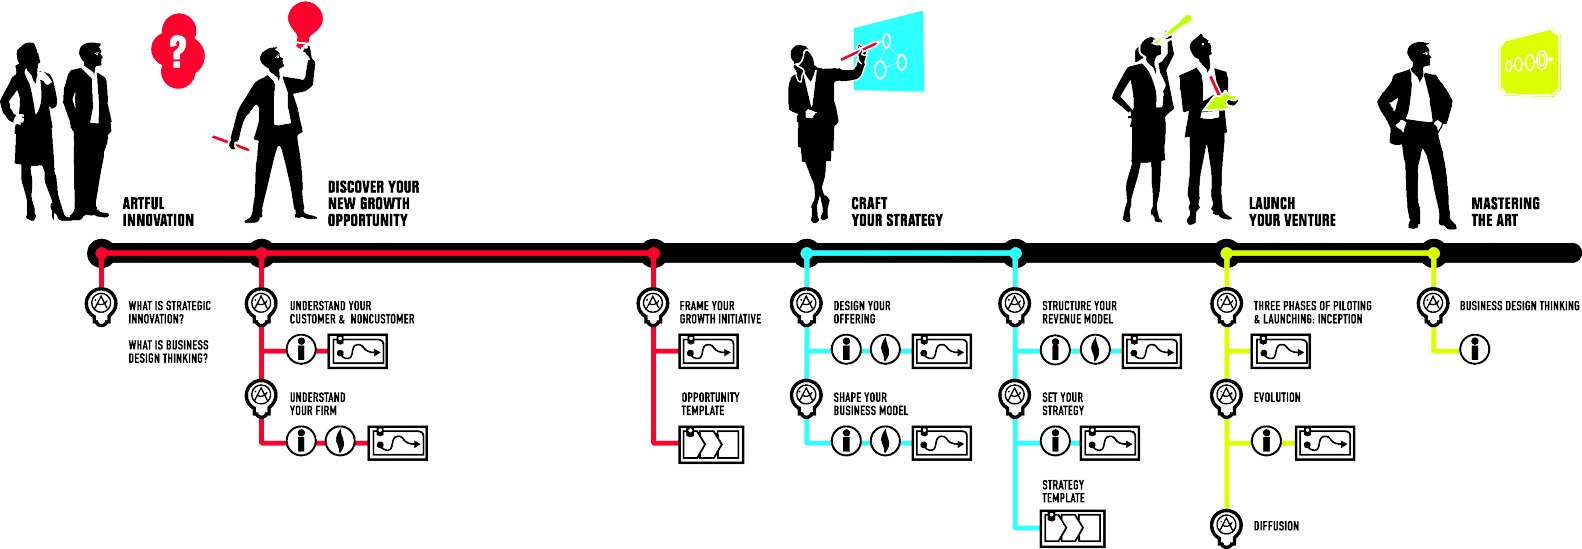 Figure depicting the reader's journey that includes artful innovation, discovering the new growth opportunity, crafting the strategy, launching the venture, and mastering the art.